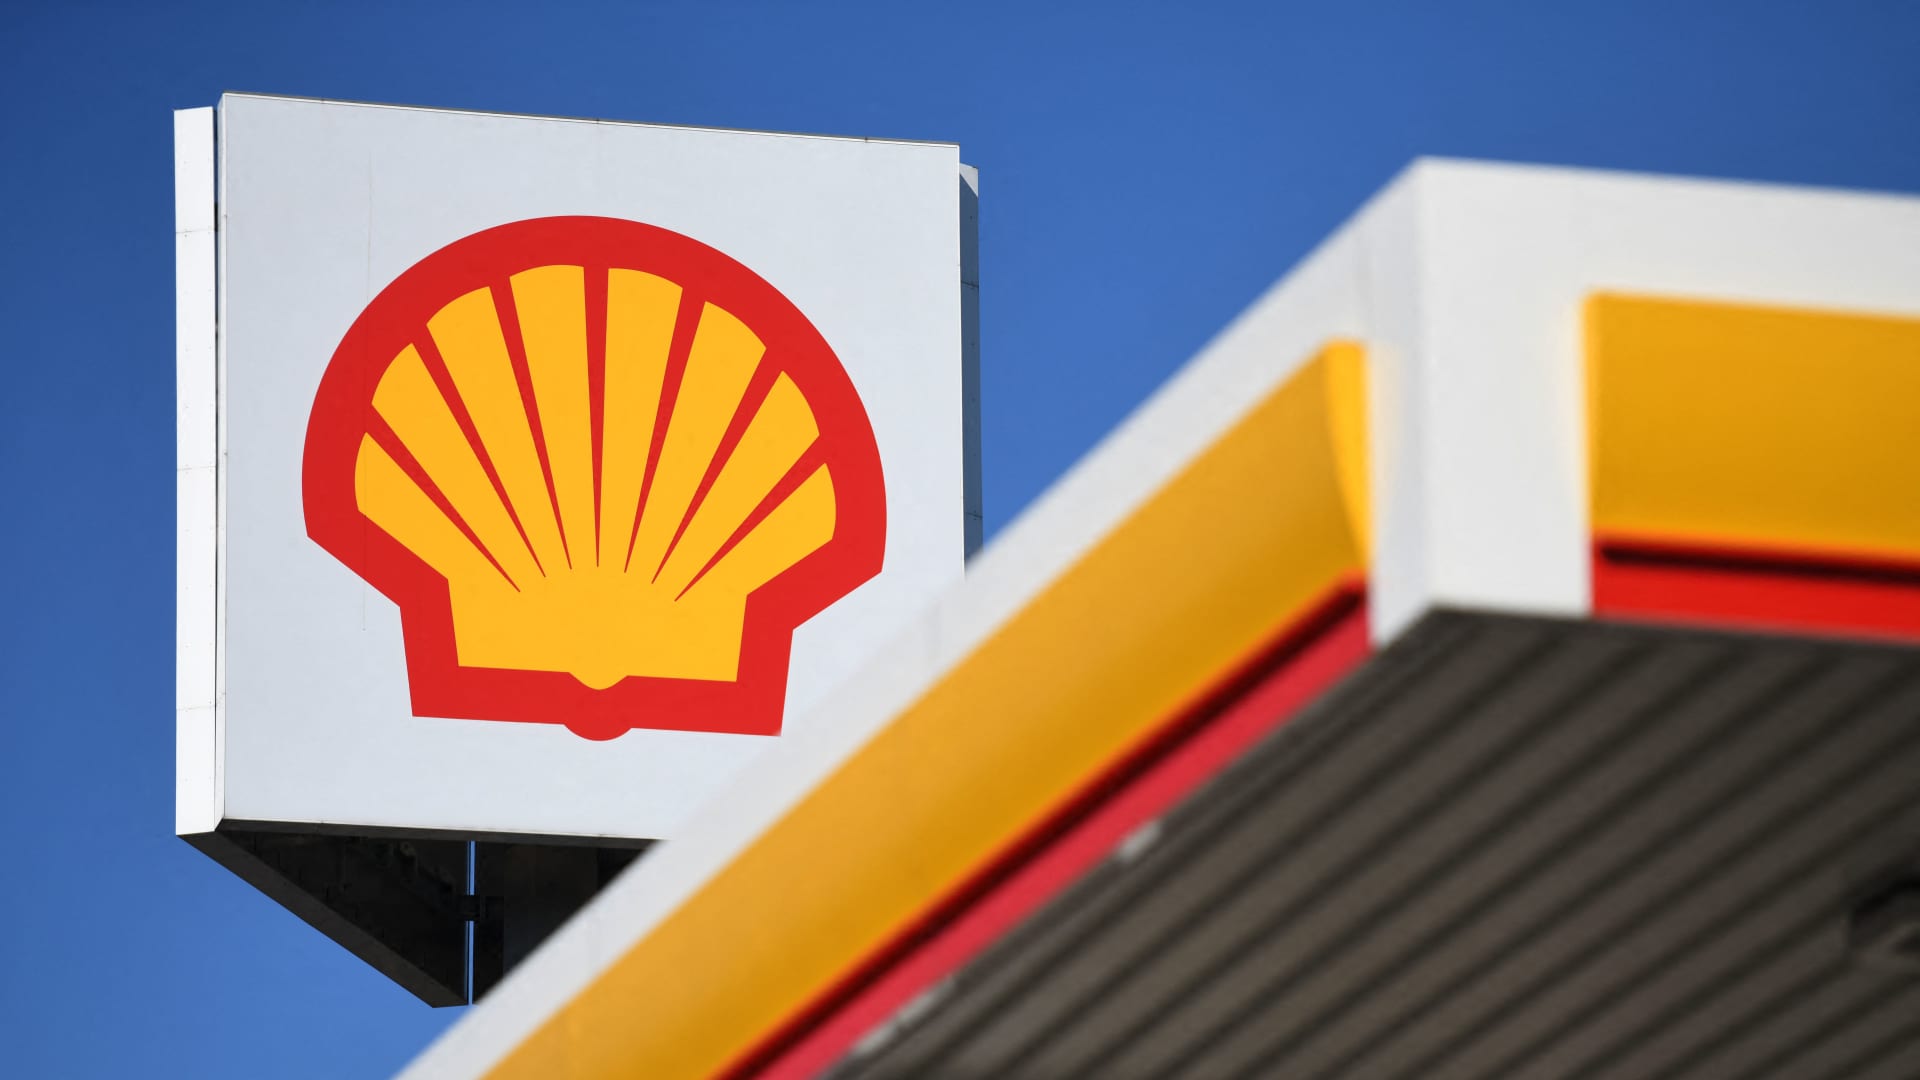 Shell CEO Ben van Beurden to step down at the end of the year, Wael Sawan appointed successor